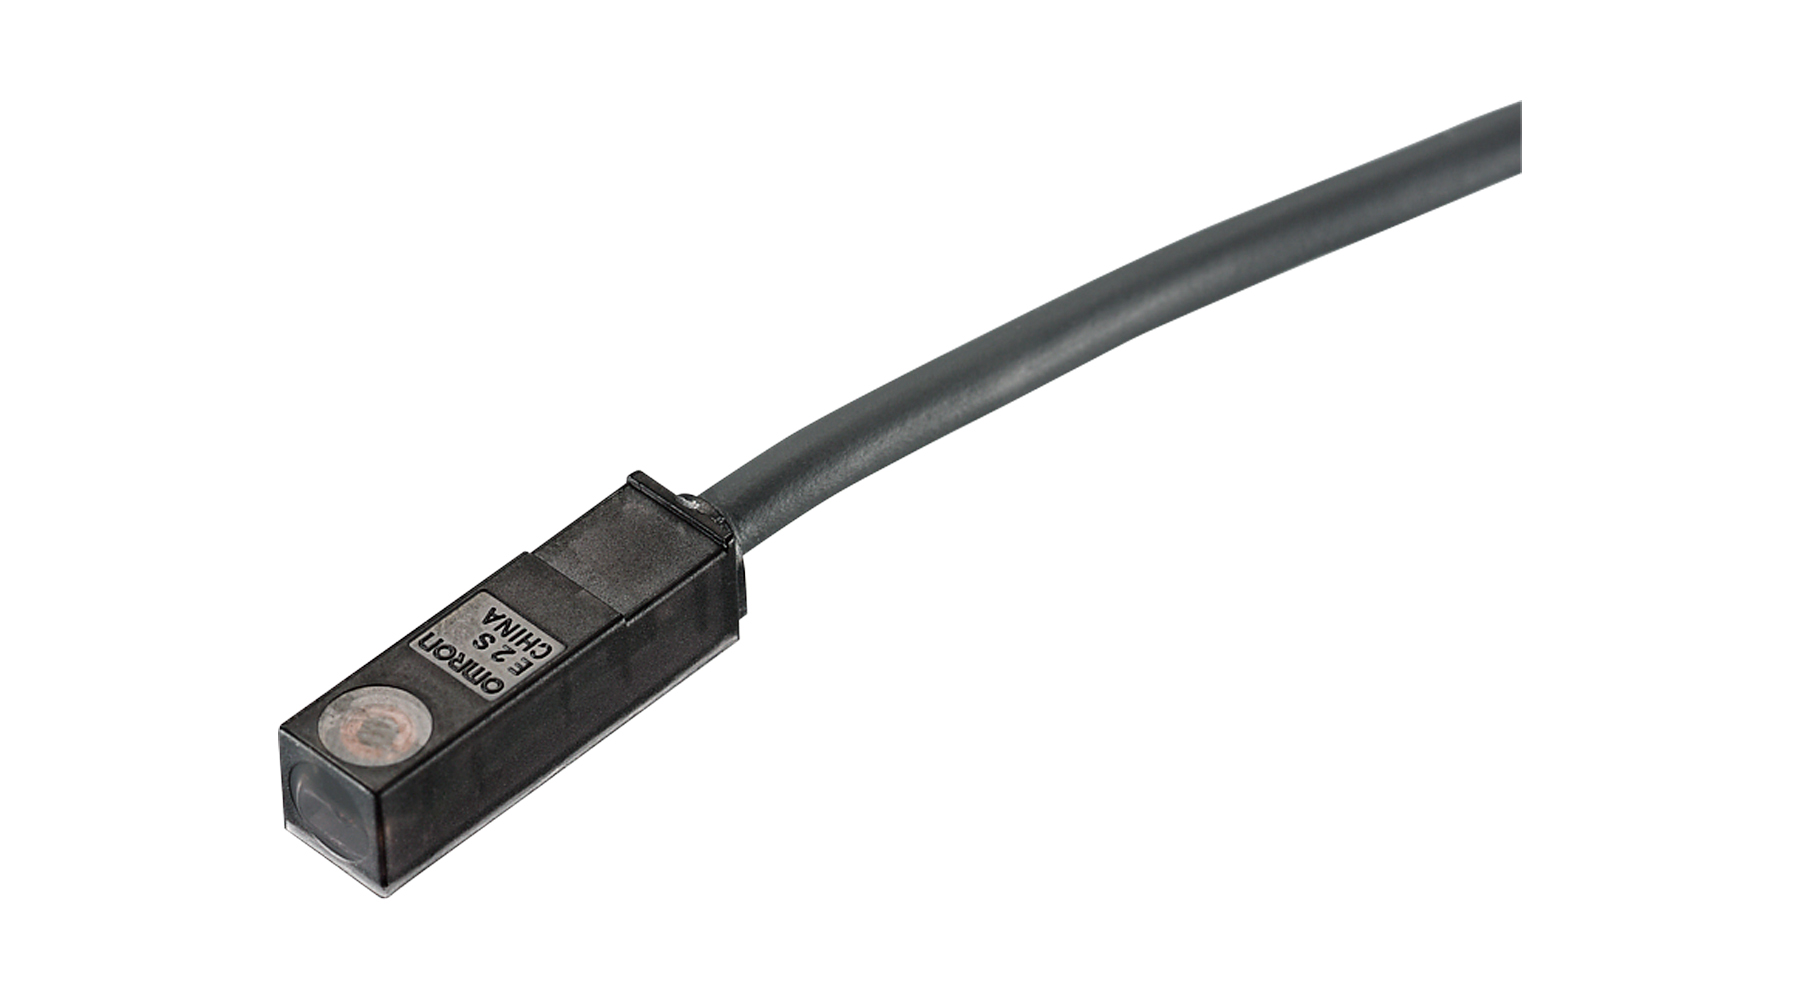 PROXIMITY SWITCH FOR RUNNER CONFIRMATION